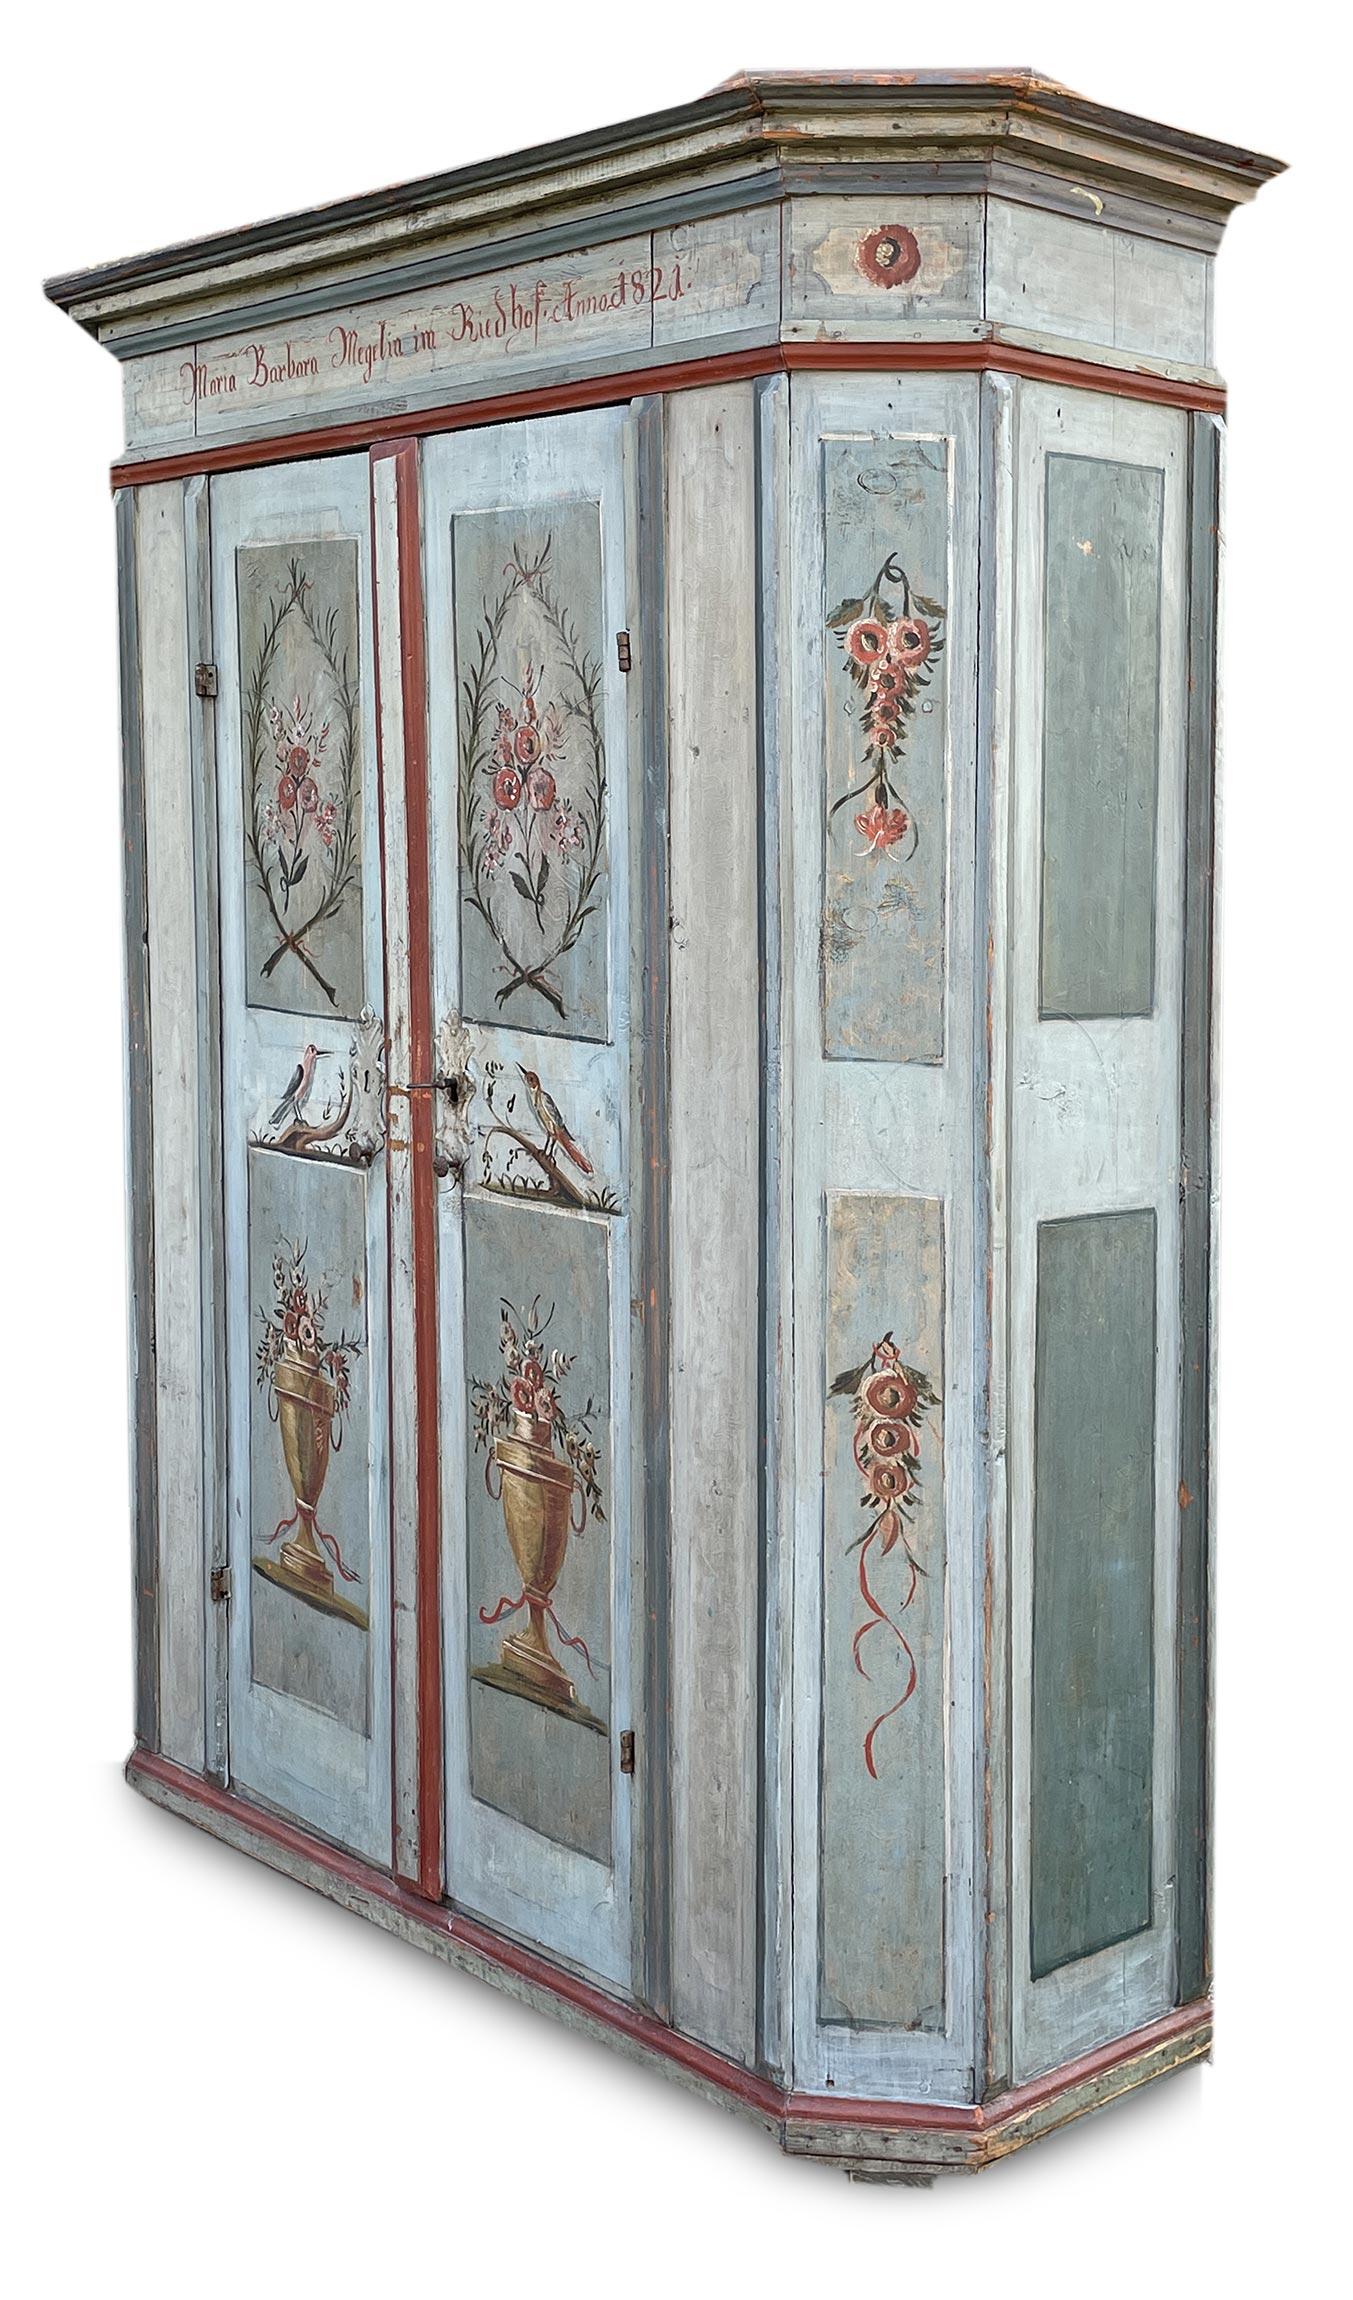 Swiss 1821 Light Blue Floral Painted Cabinet